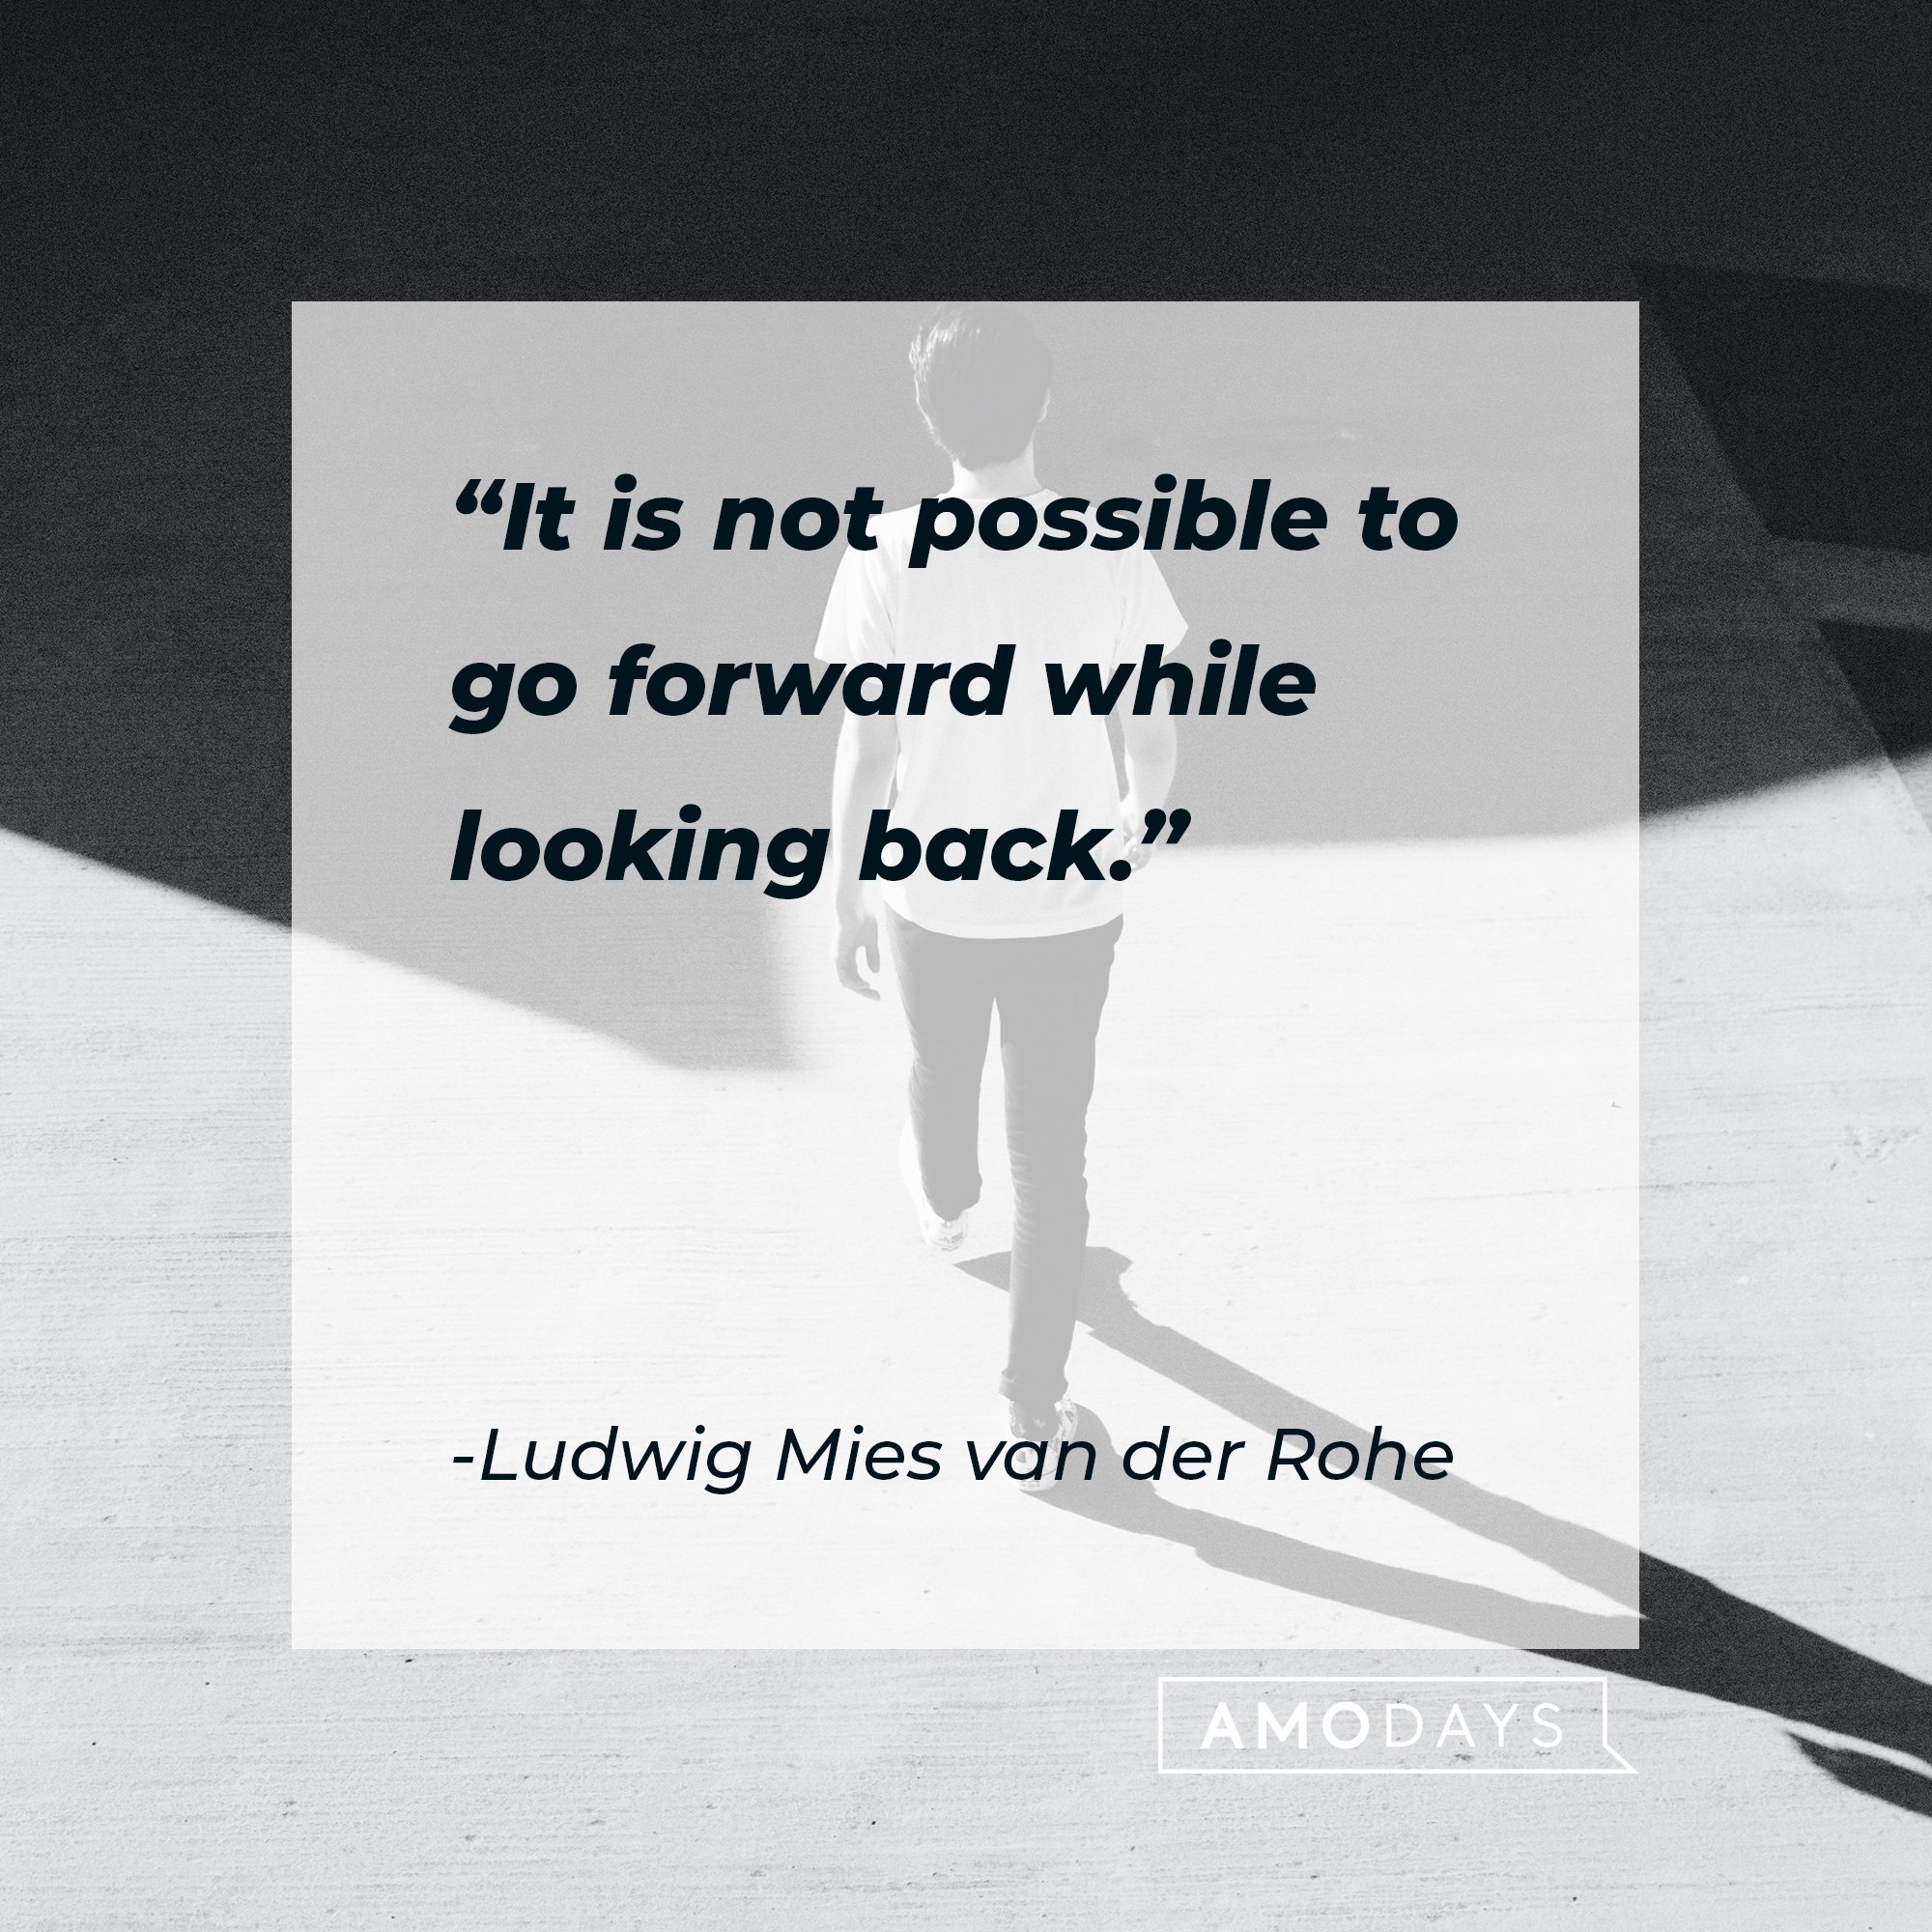 Ludwig Mies van der Rohe’s quote: "It is not possible to go forward while looking back."   | Image: AmoDays